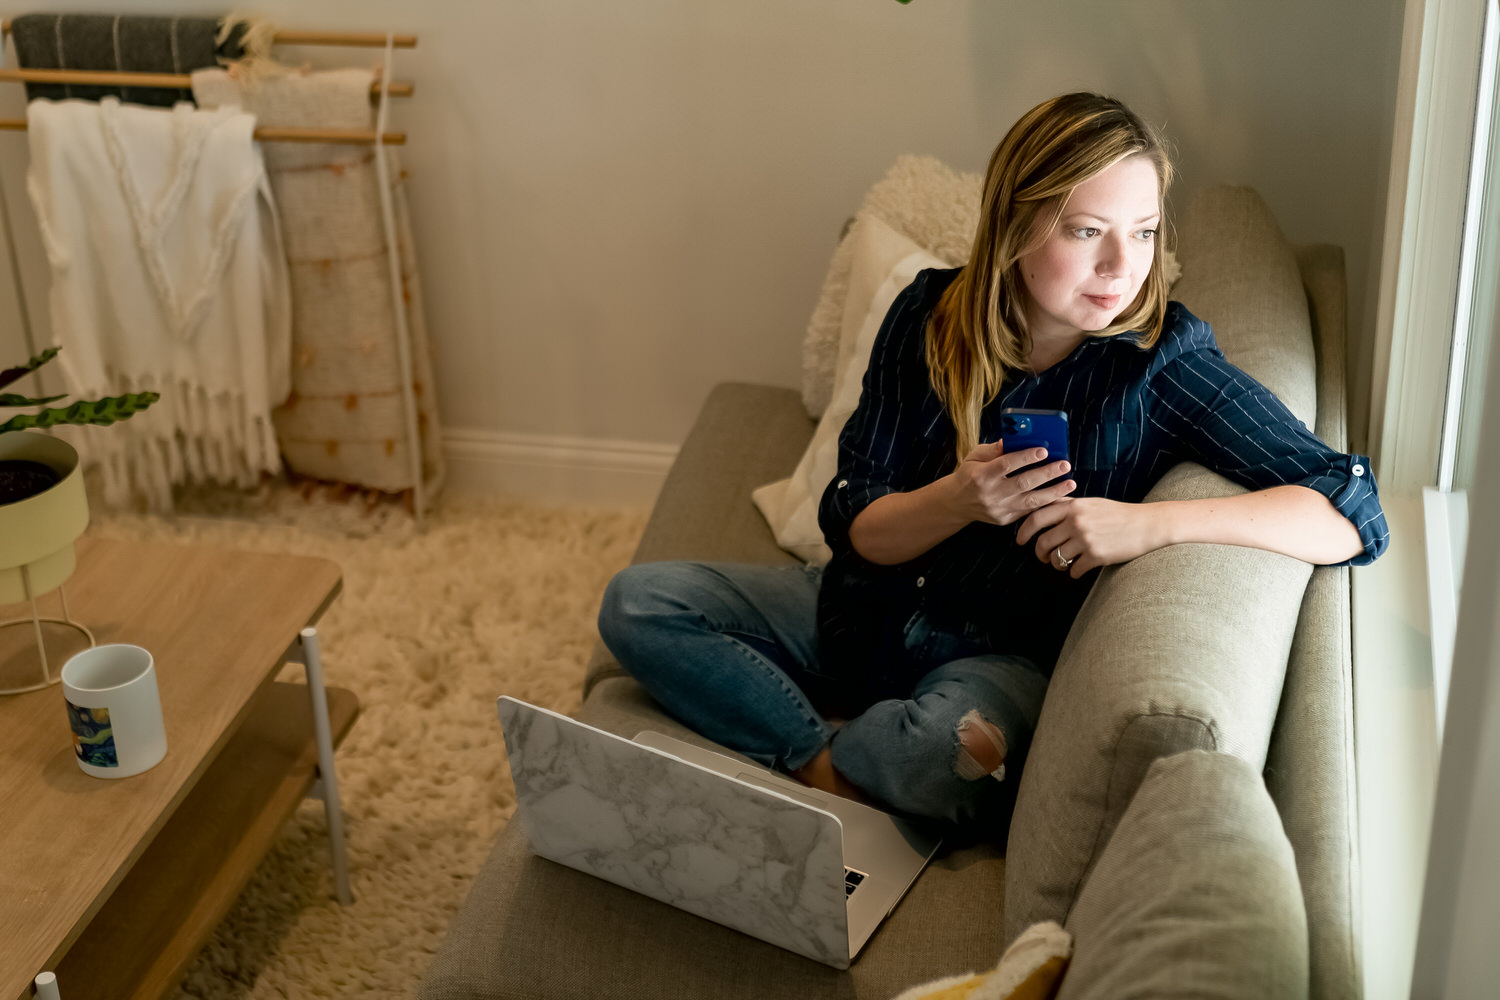 A picture of a woman in a blue shirt sitting on a couch, staring out a window, er phone in her hand. 